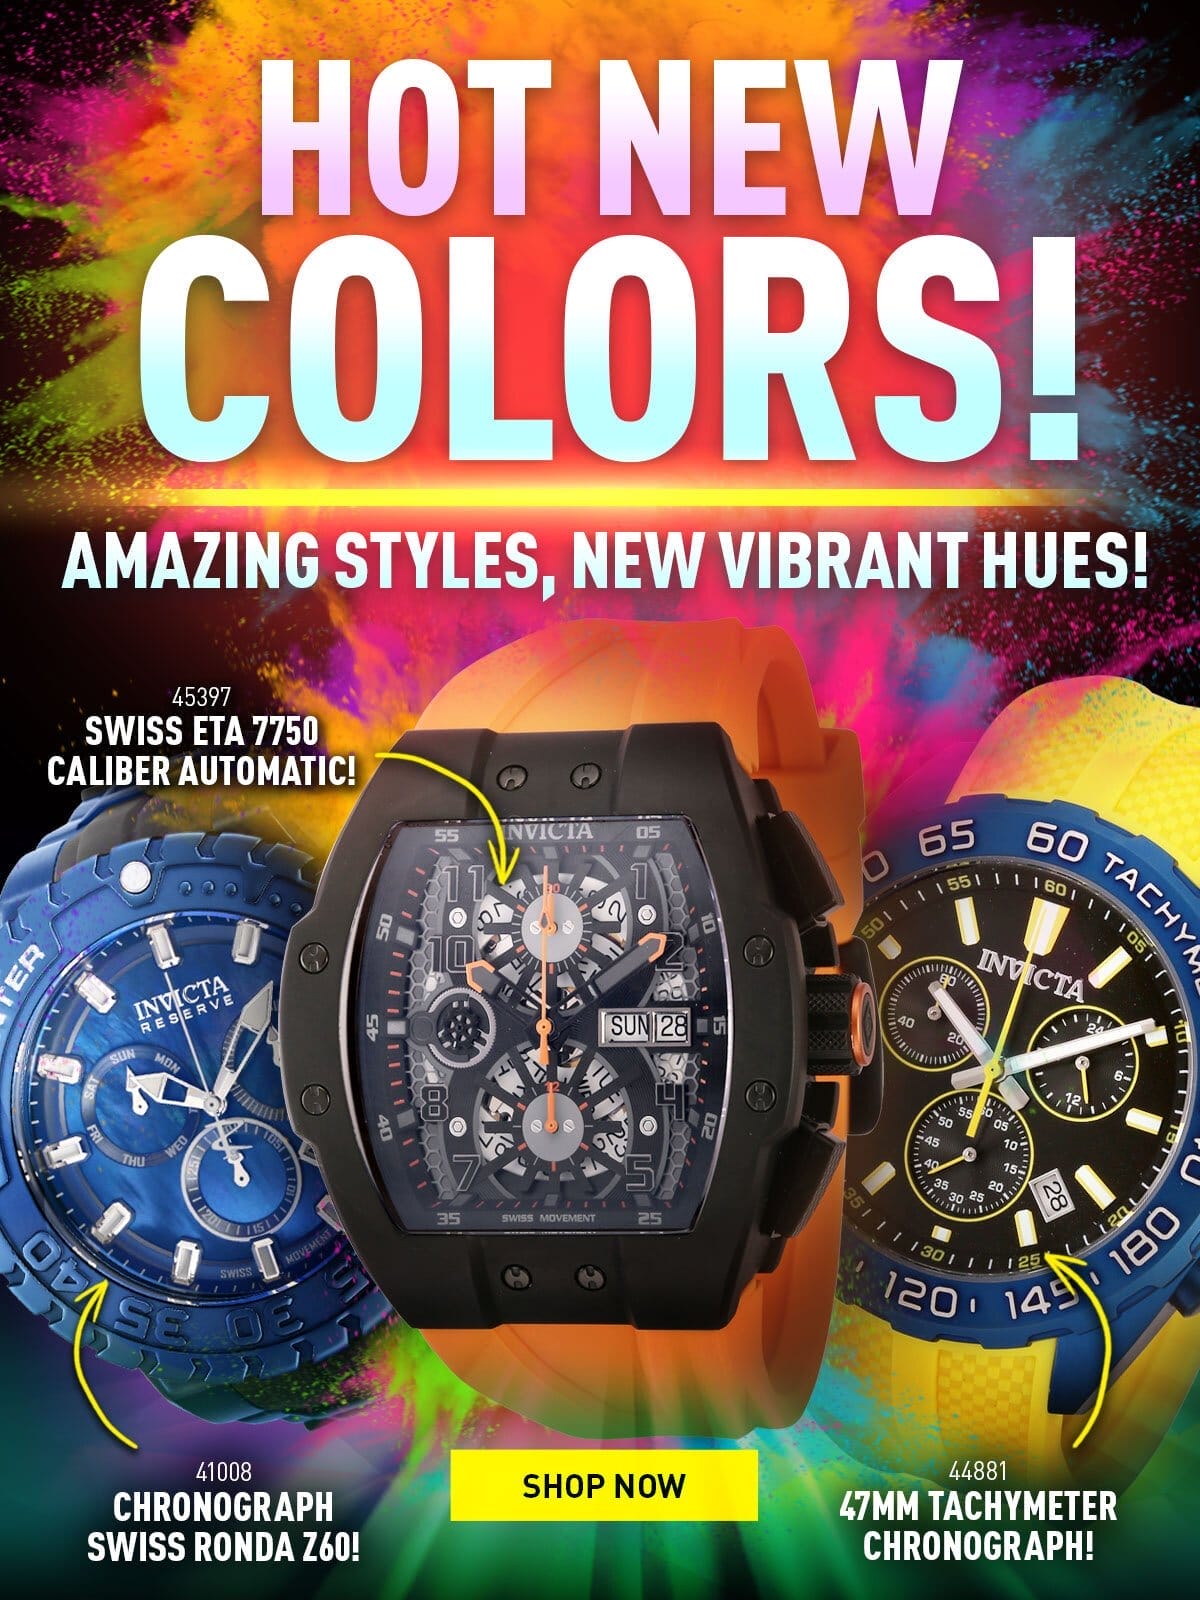 Hot new colors! - Amazing styles, new vibrant hues!